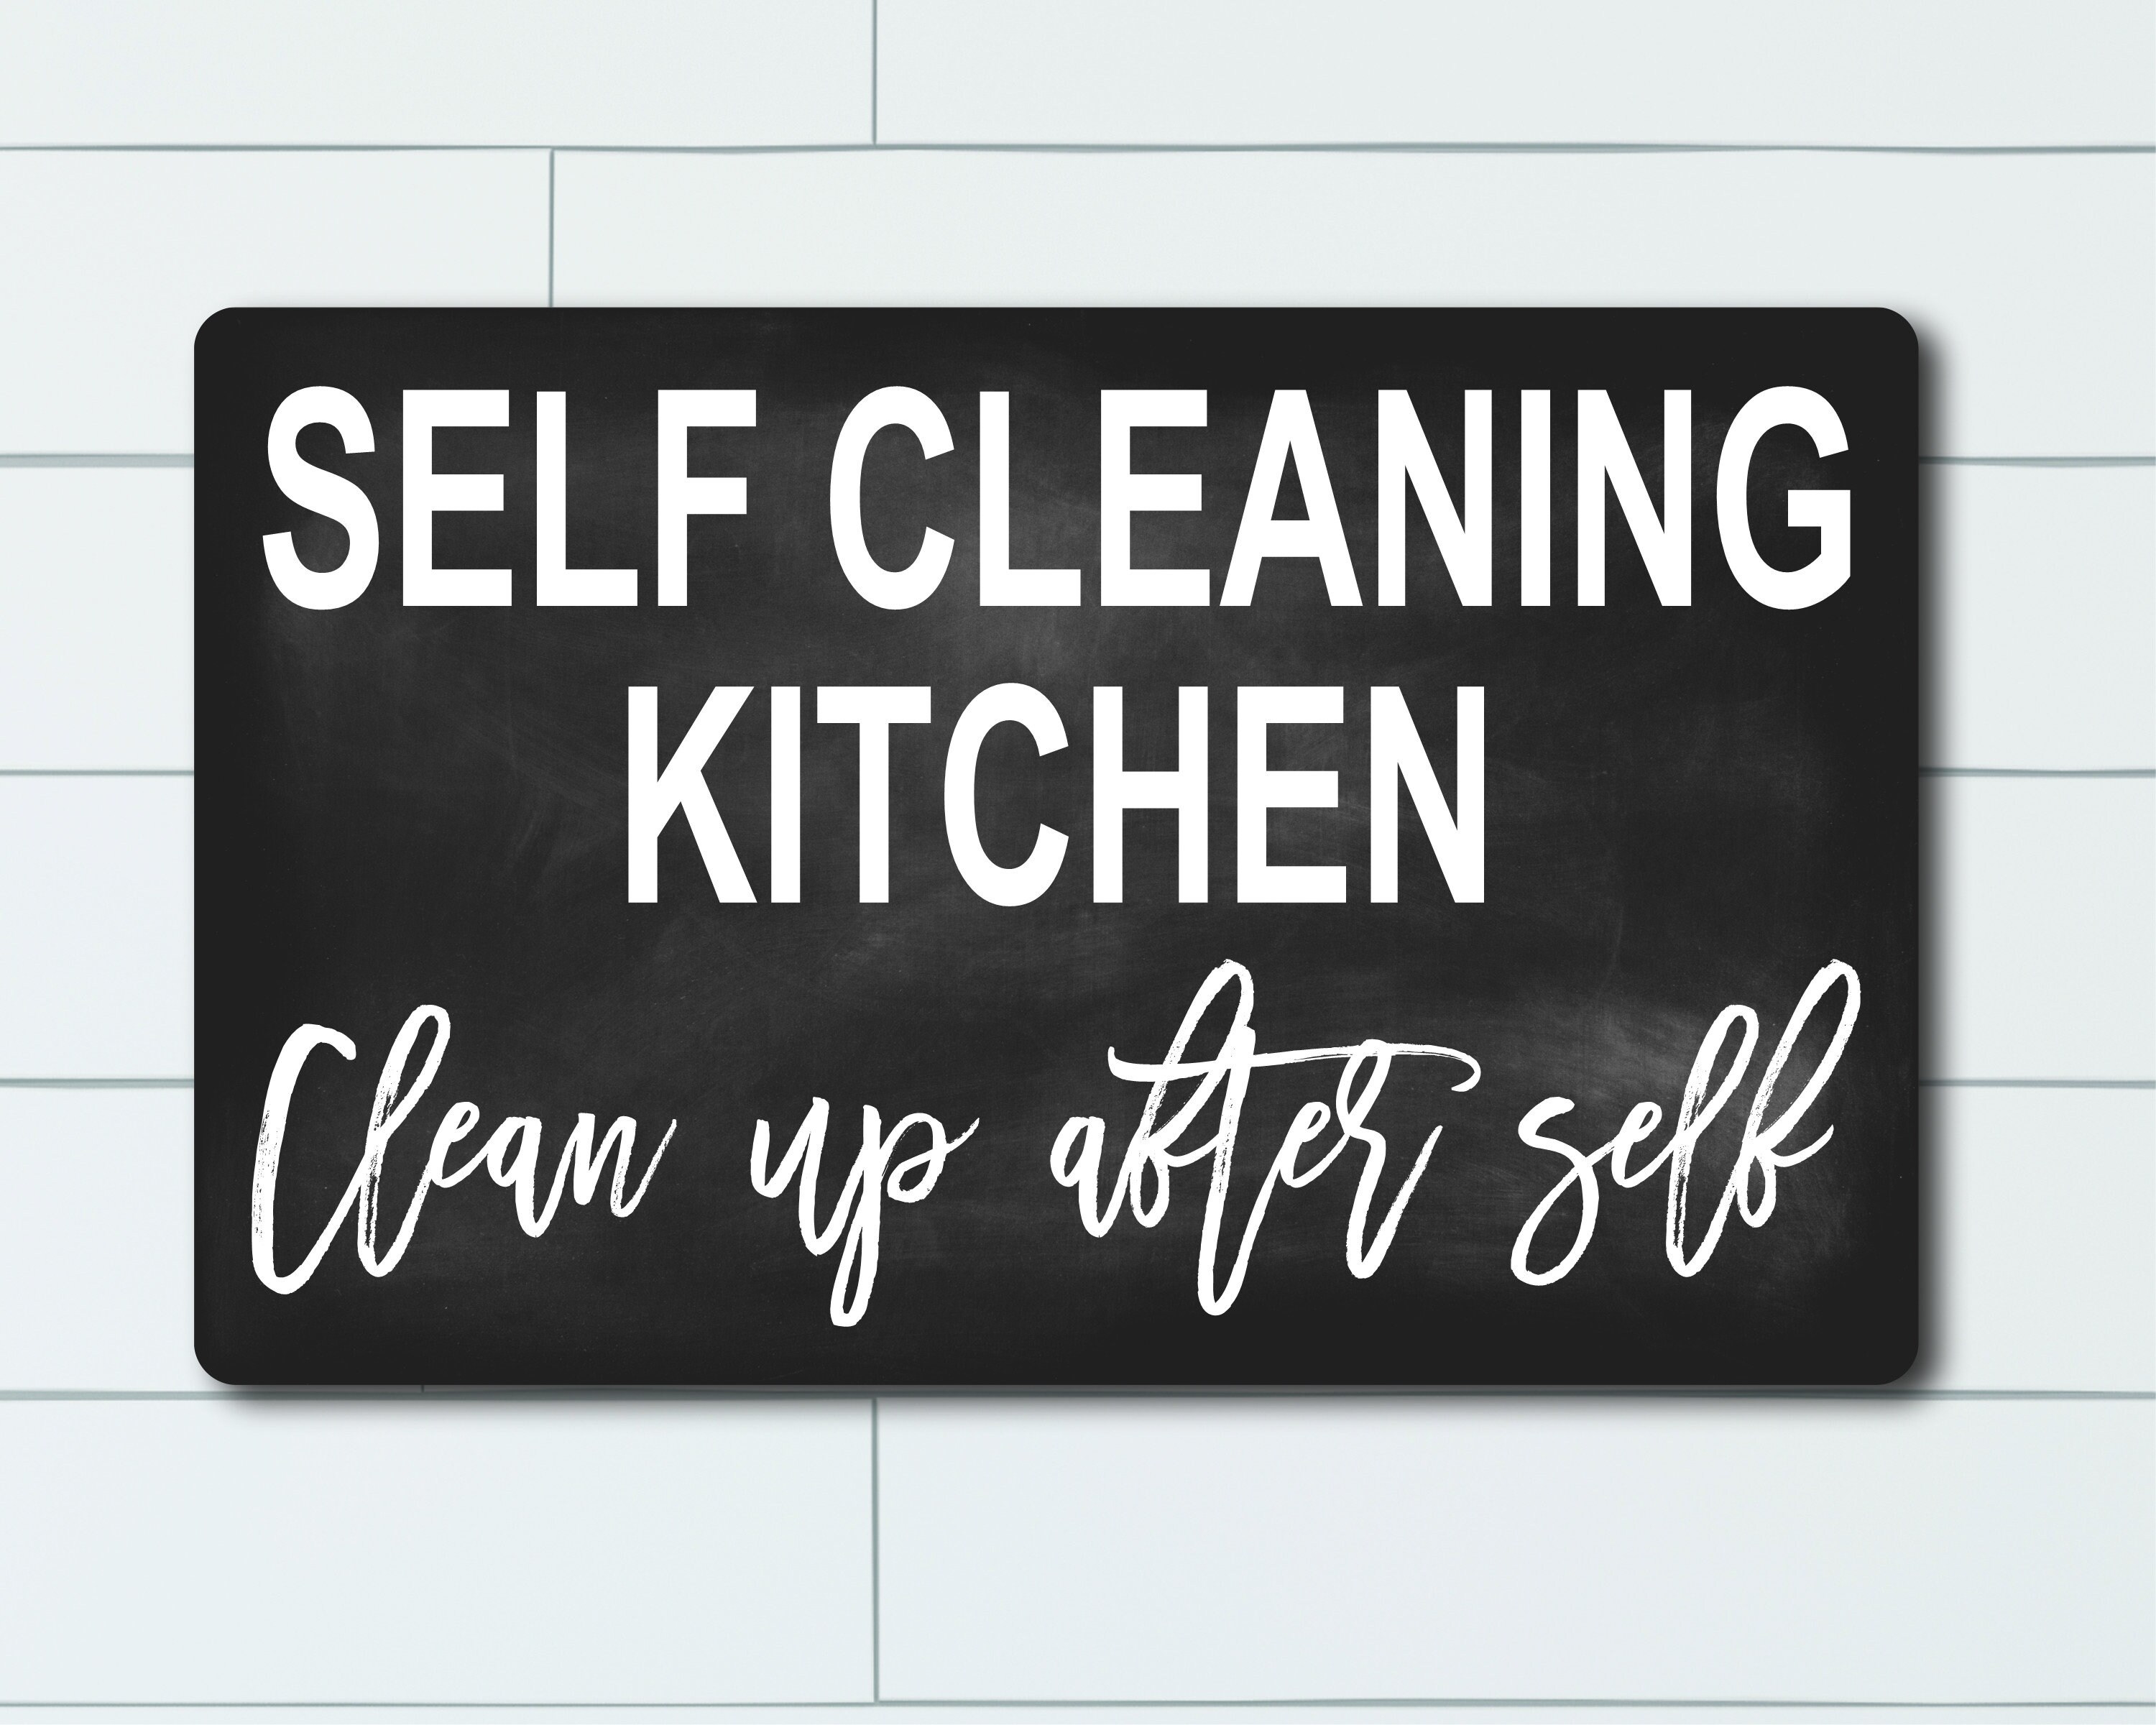 This is a Self-Cleaning Kitchen Wall Decor Sign, Kitchen Decor, Printed  Wood Plaque Sign, Hanging Funny Kitchen Signs, Family Signs for Home Decor